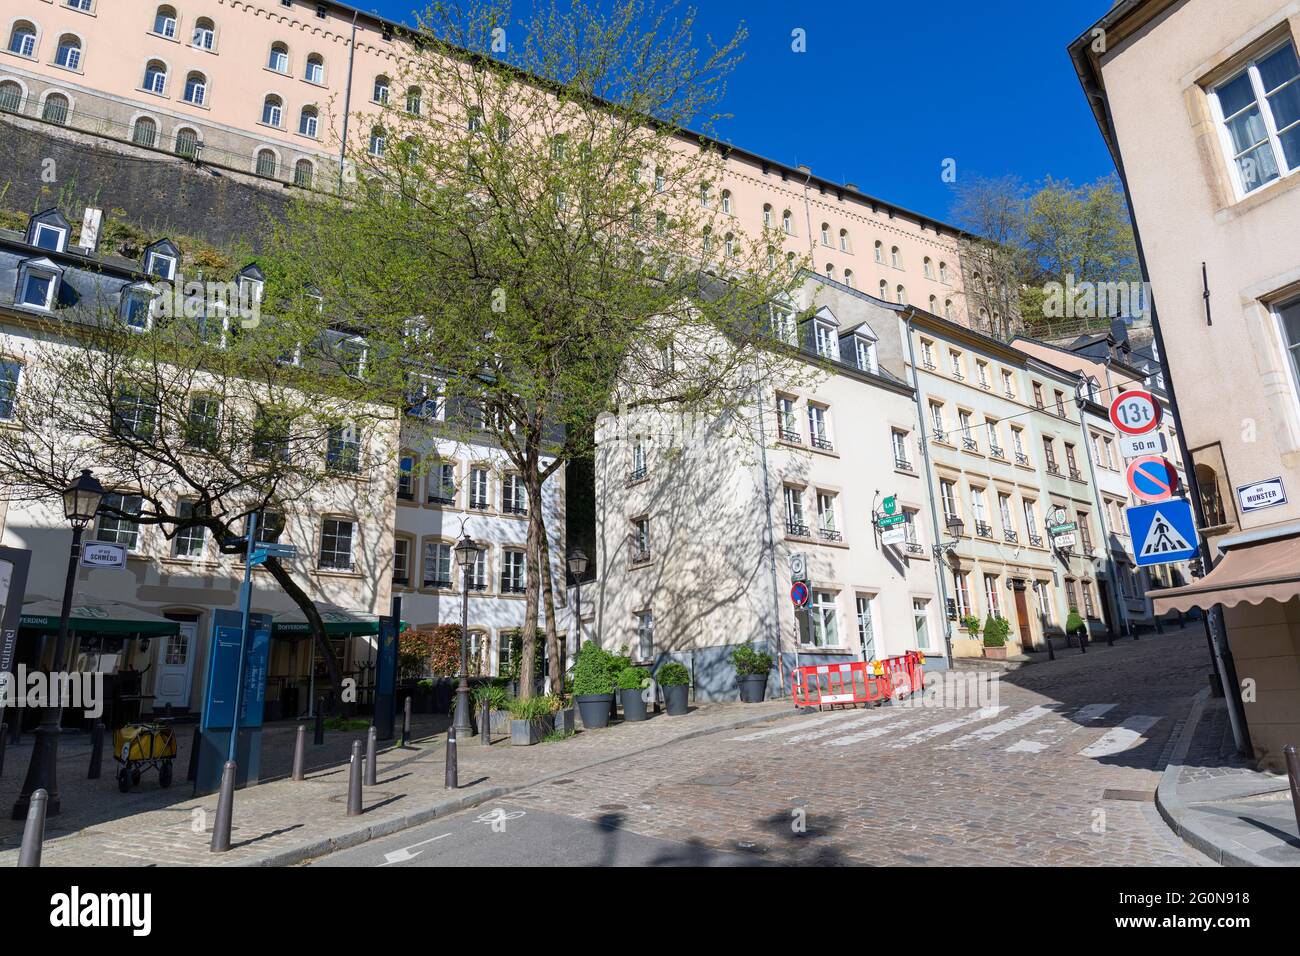 Europe, Luxembourg, Luxembourg City, Montée du Grund, Traditional Street with Houses and Bars Stock Photo